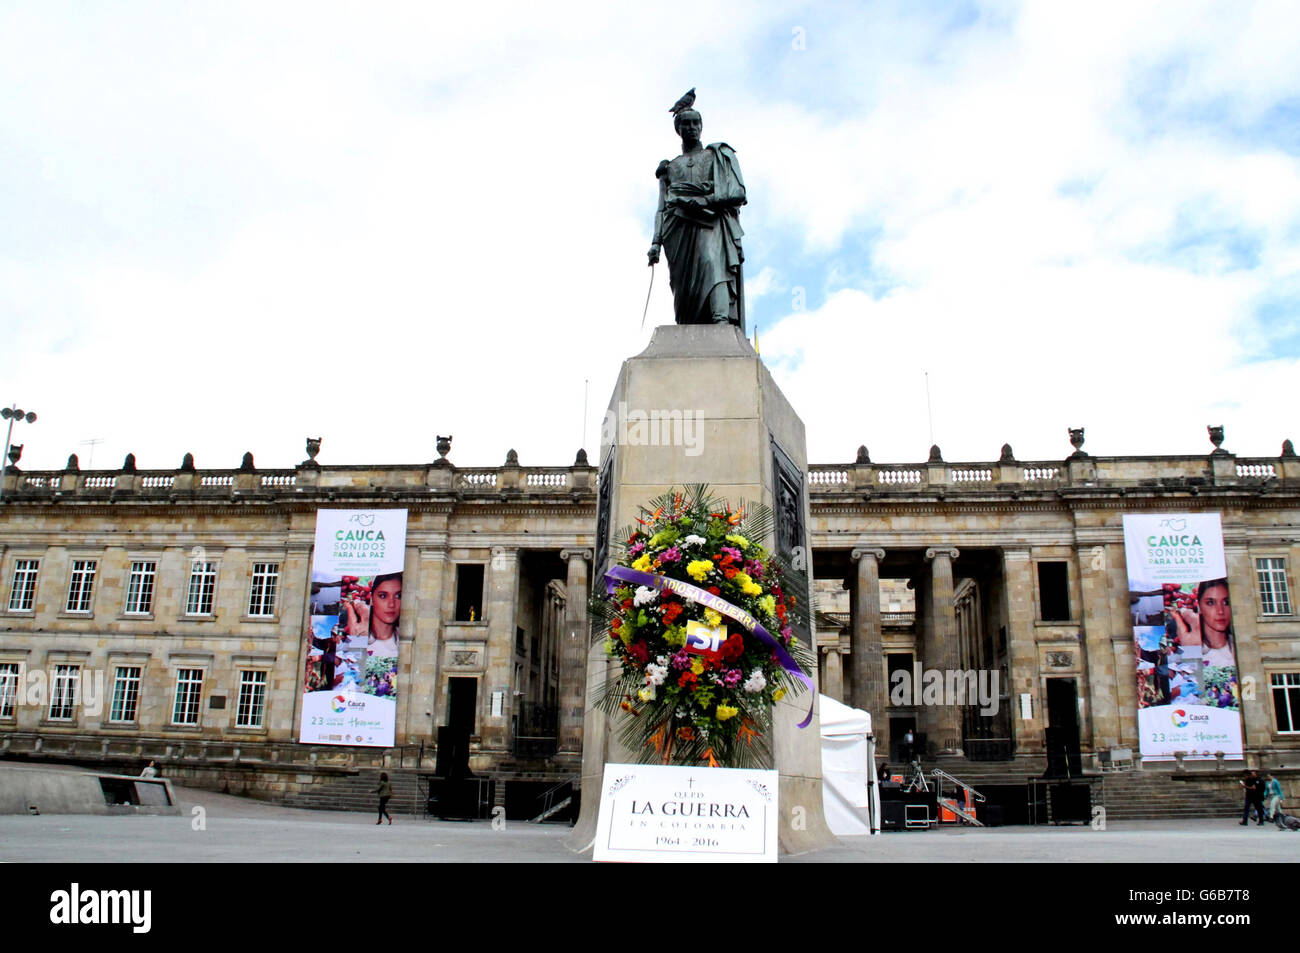 Bogota, Colombia. 23rd June, 2016. A flower wreath placed as a symbol of the end of the conflict between Colombia's government and the Revolutionary Armed Forces of Colombia (FARC) guerrilla force remains at the bottom of the statue of Simon Bolivar, at Bolivar Square, in Bogota, Colombia, on June 23, 2016. Colombia's government and the FARC guerrilla force signed a historic ceasefire agreement Thursday in Havana that will move the South American nation closer to the end of a half-century civil war. © COLPRENSA/Xinhua/Alamy Live News Stock Photo